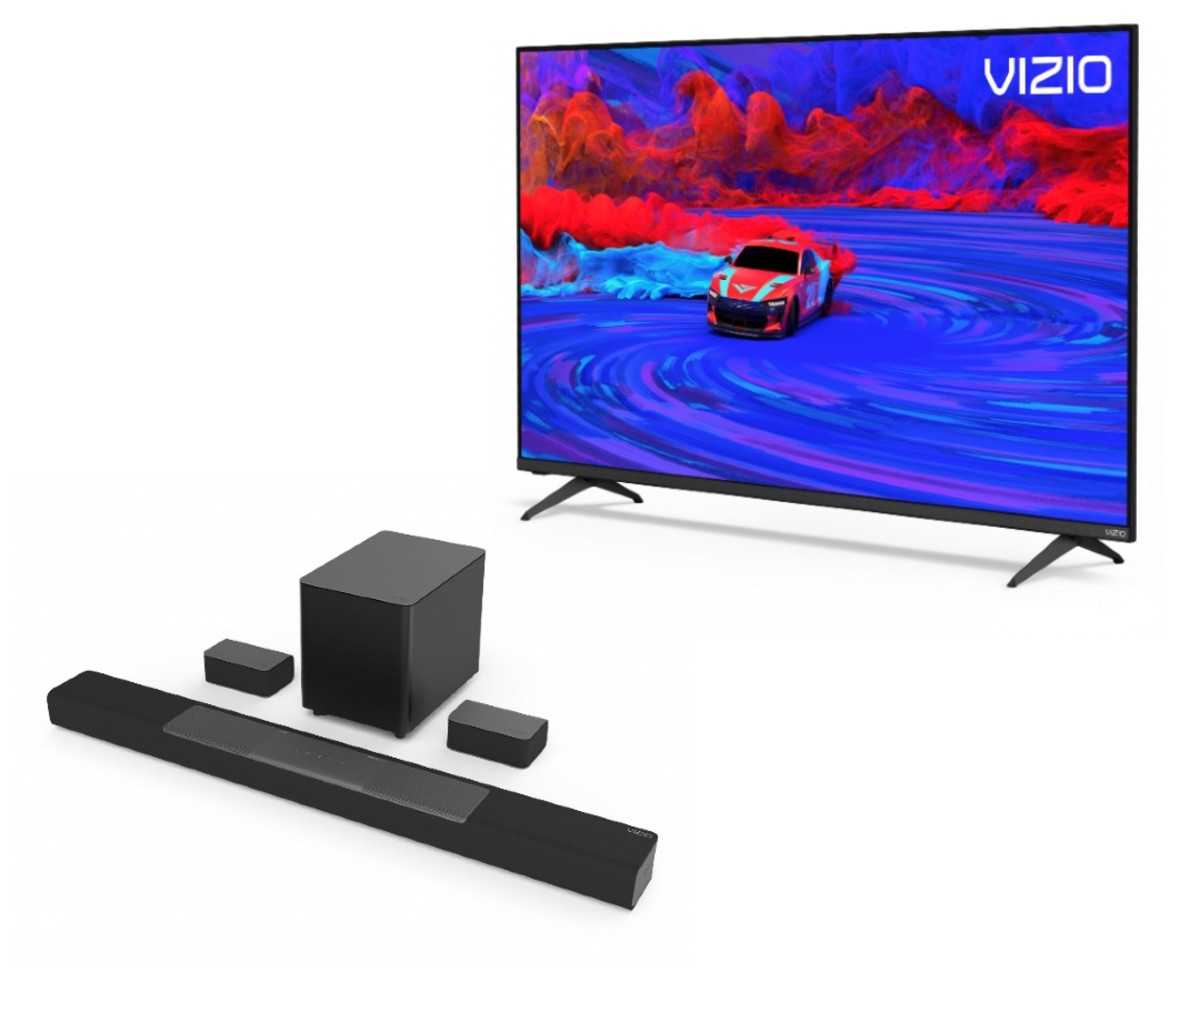 The new Vizio M-Series line of TVs and sound bars are a budget-friendly way to instantly upgrade your home theater.